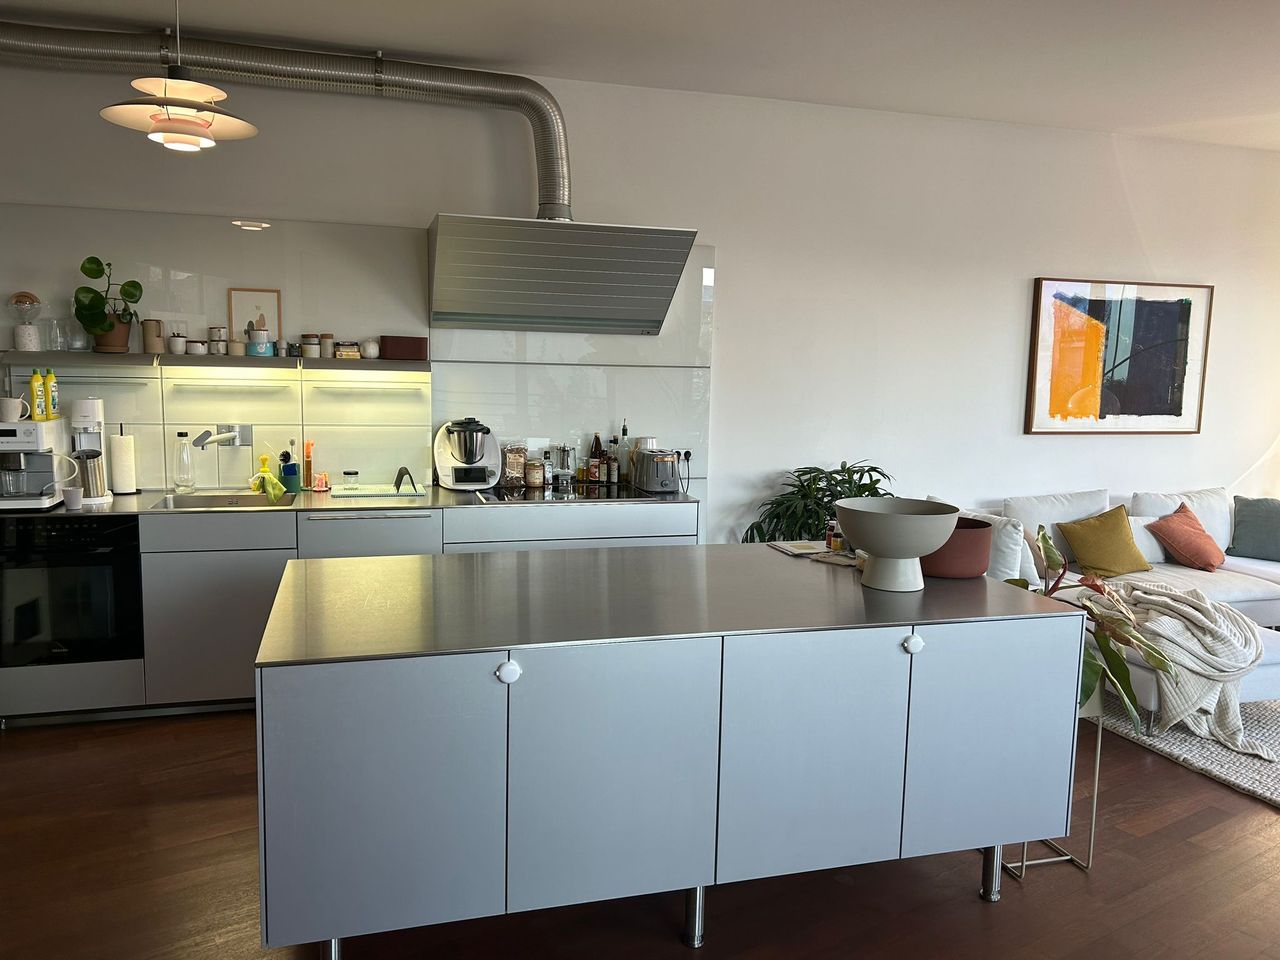 Impressive architect-designed flat with large balcony, just a minute's walk from the sandy beach in Rodenkirchen